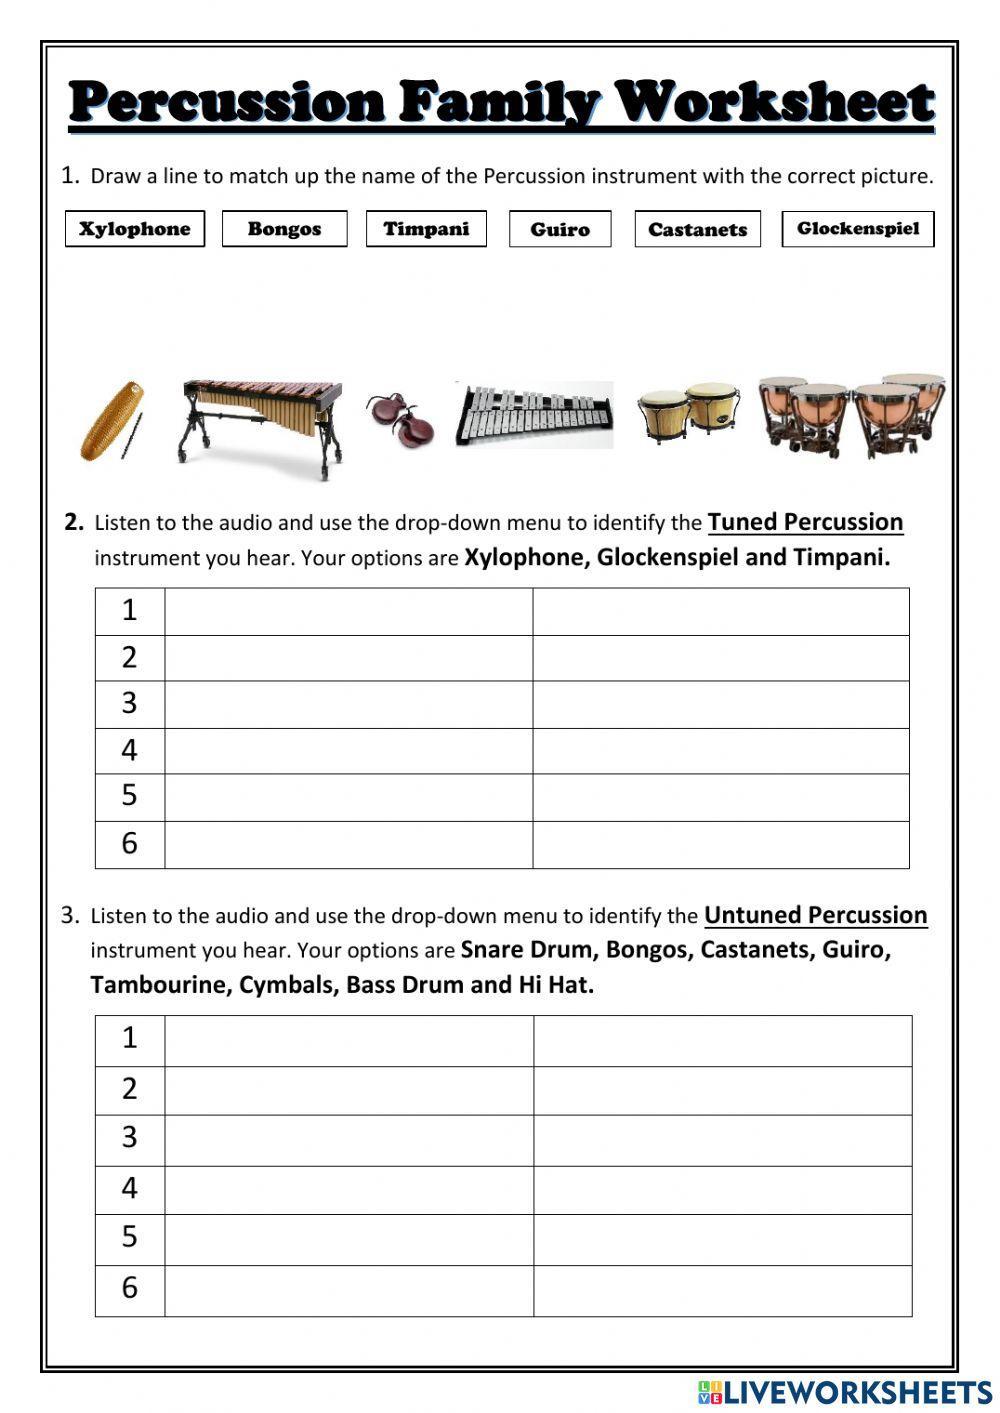 Percussion Family Worksheet